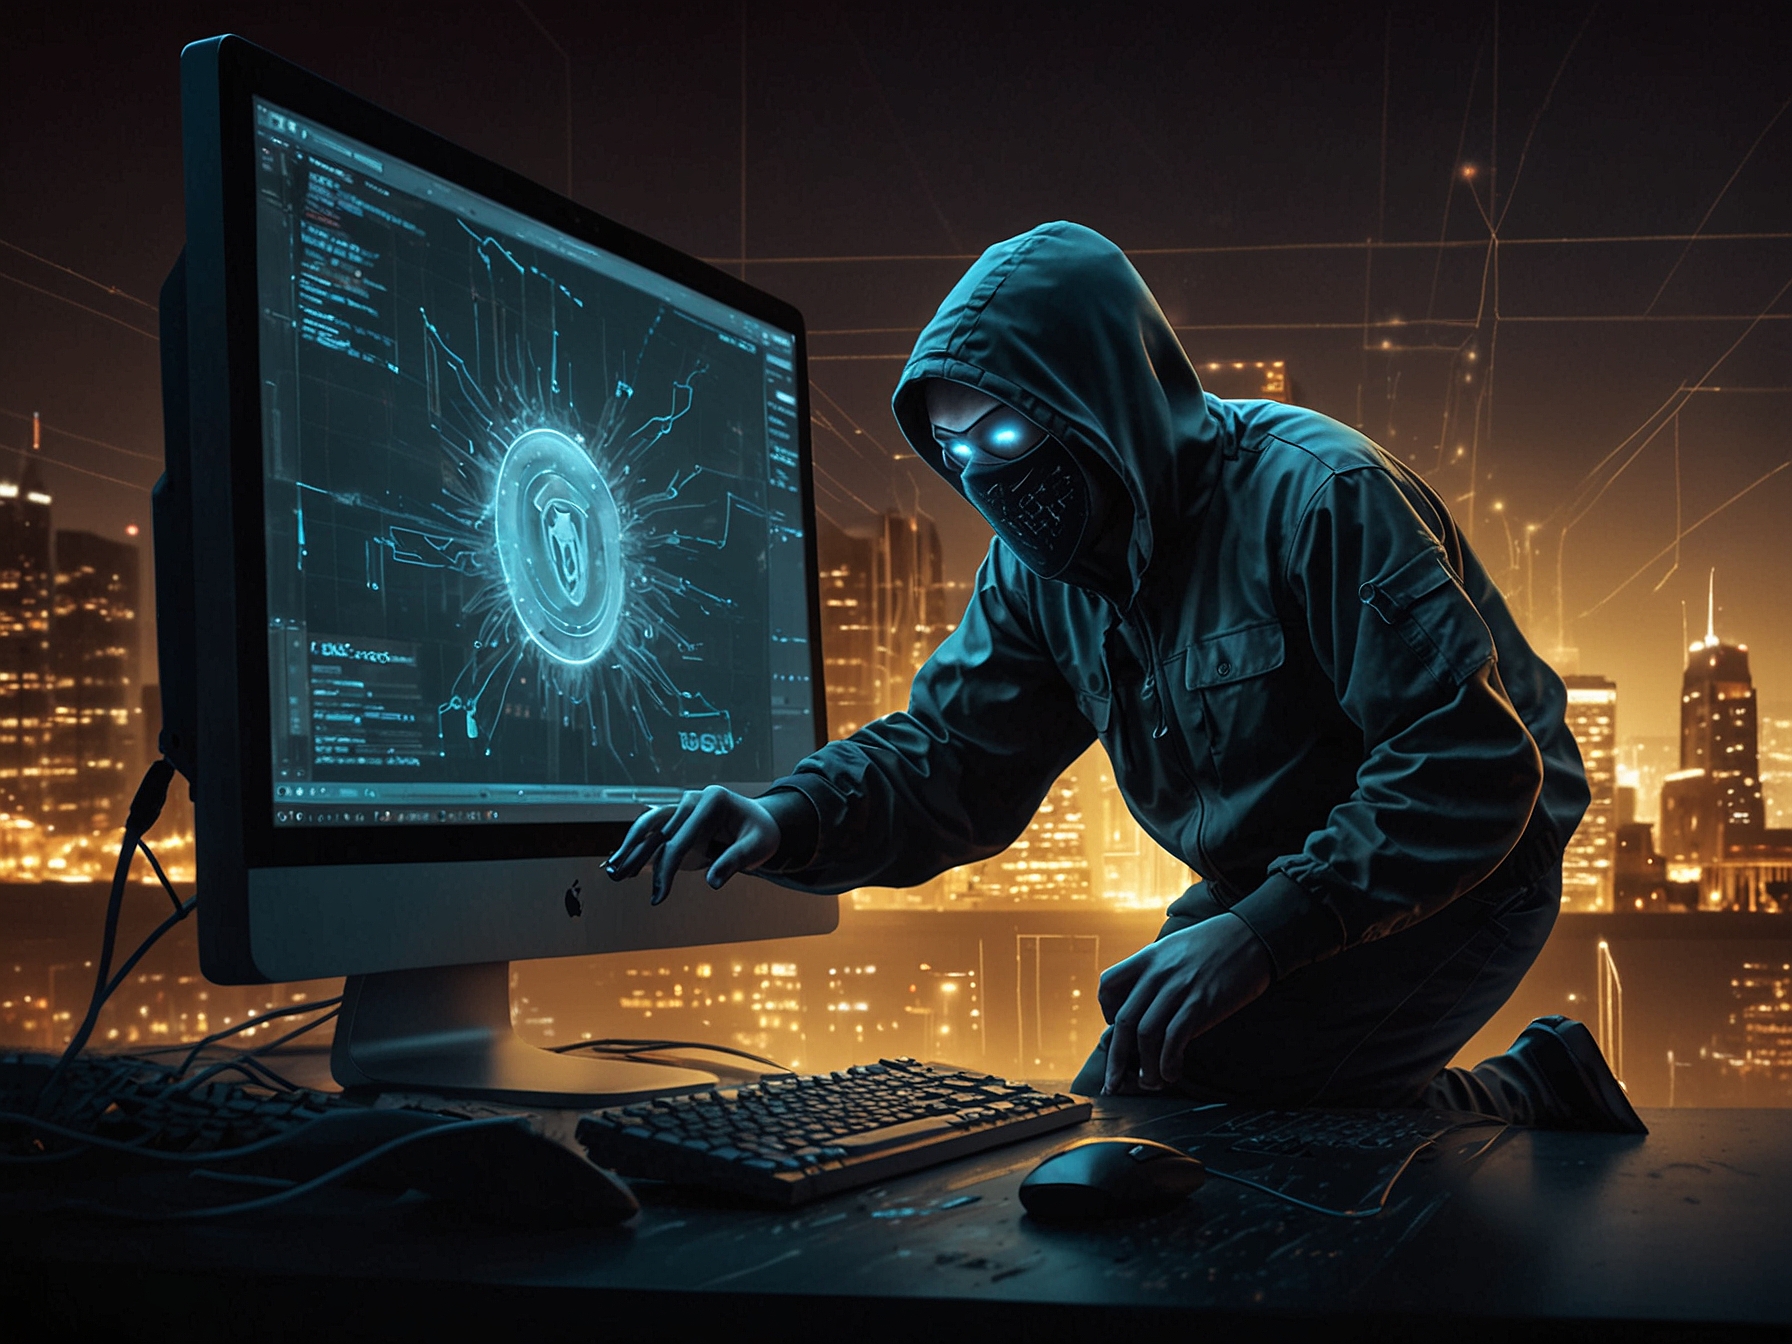 An illustration of a hacker breaching a company's cybersecurity defenses, symbolizing the RansomHub cyberattack that exposed 750,000 Frontier Communications customers' data.